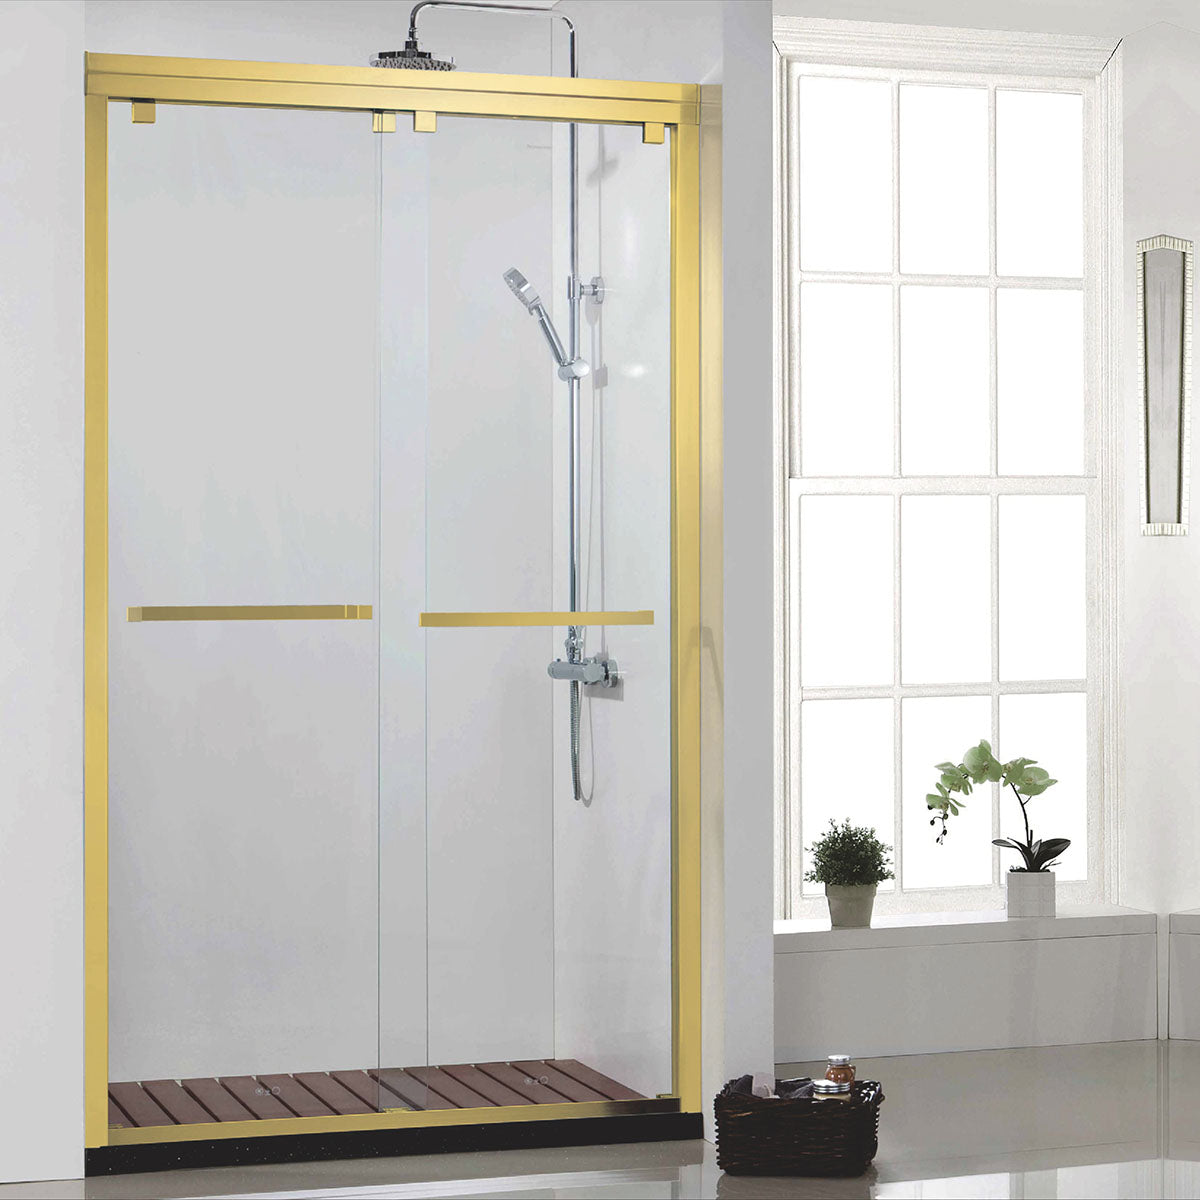 48" Bypass Shower Door with Klearteck Treatment (5/16" Thickness) (Brushed Gold) ASD Series